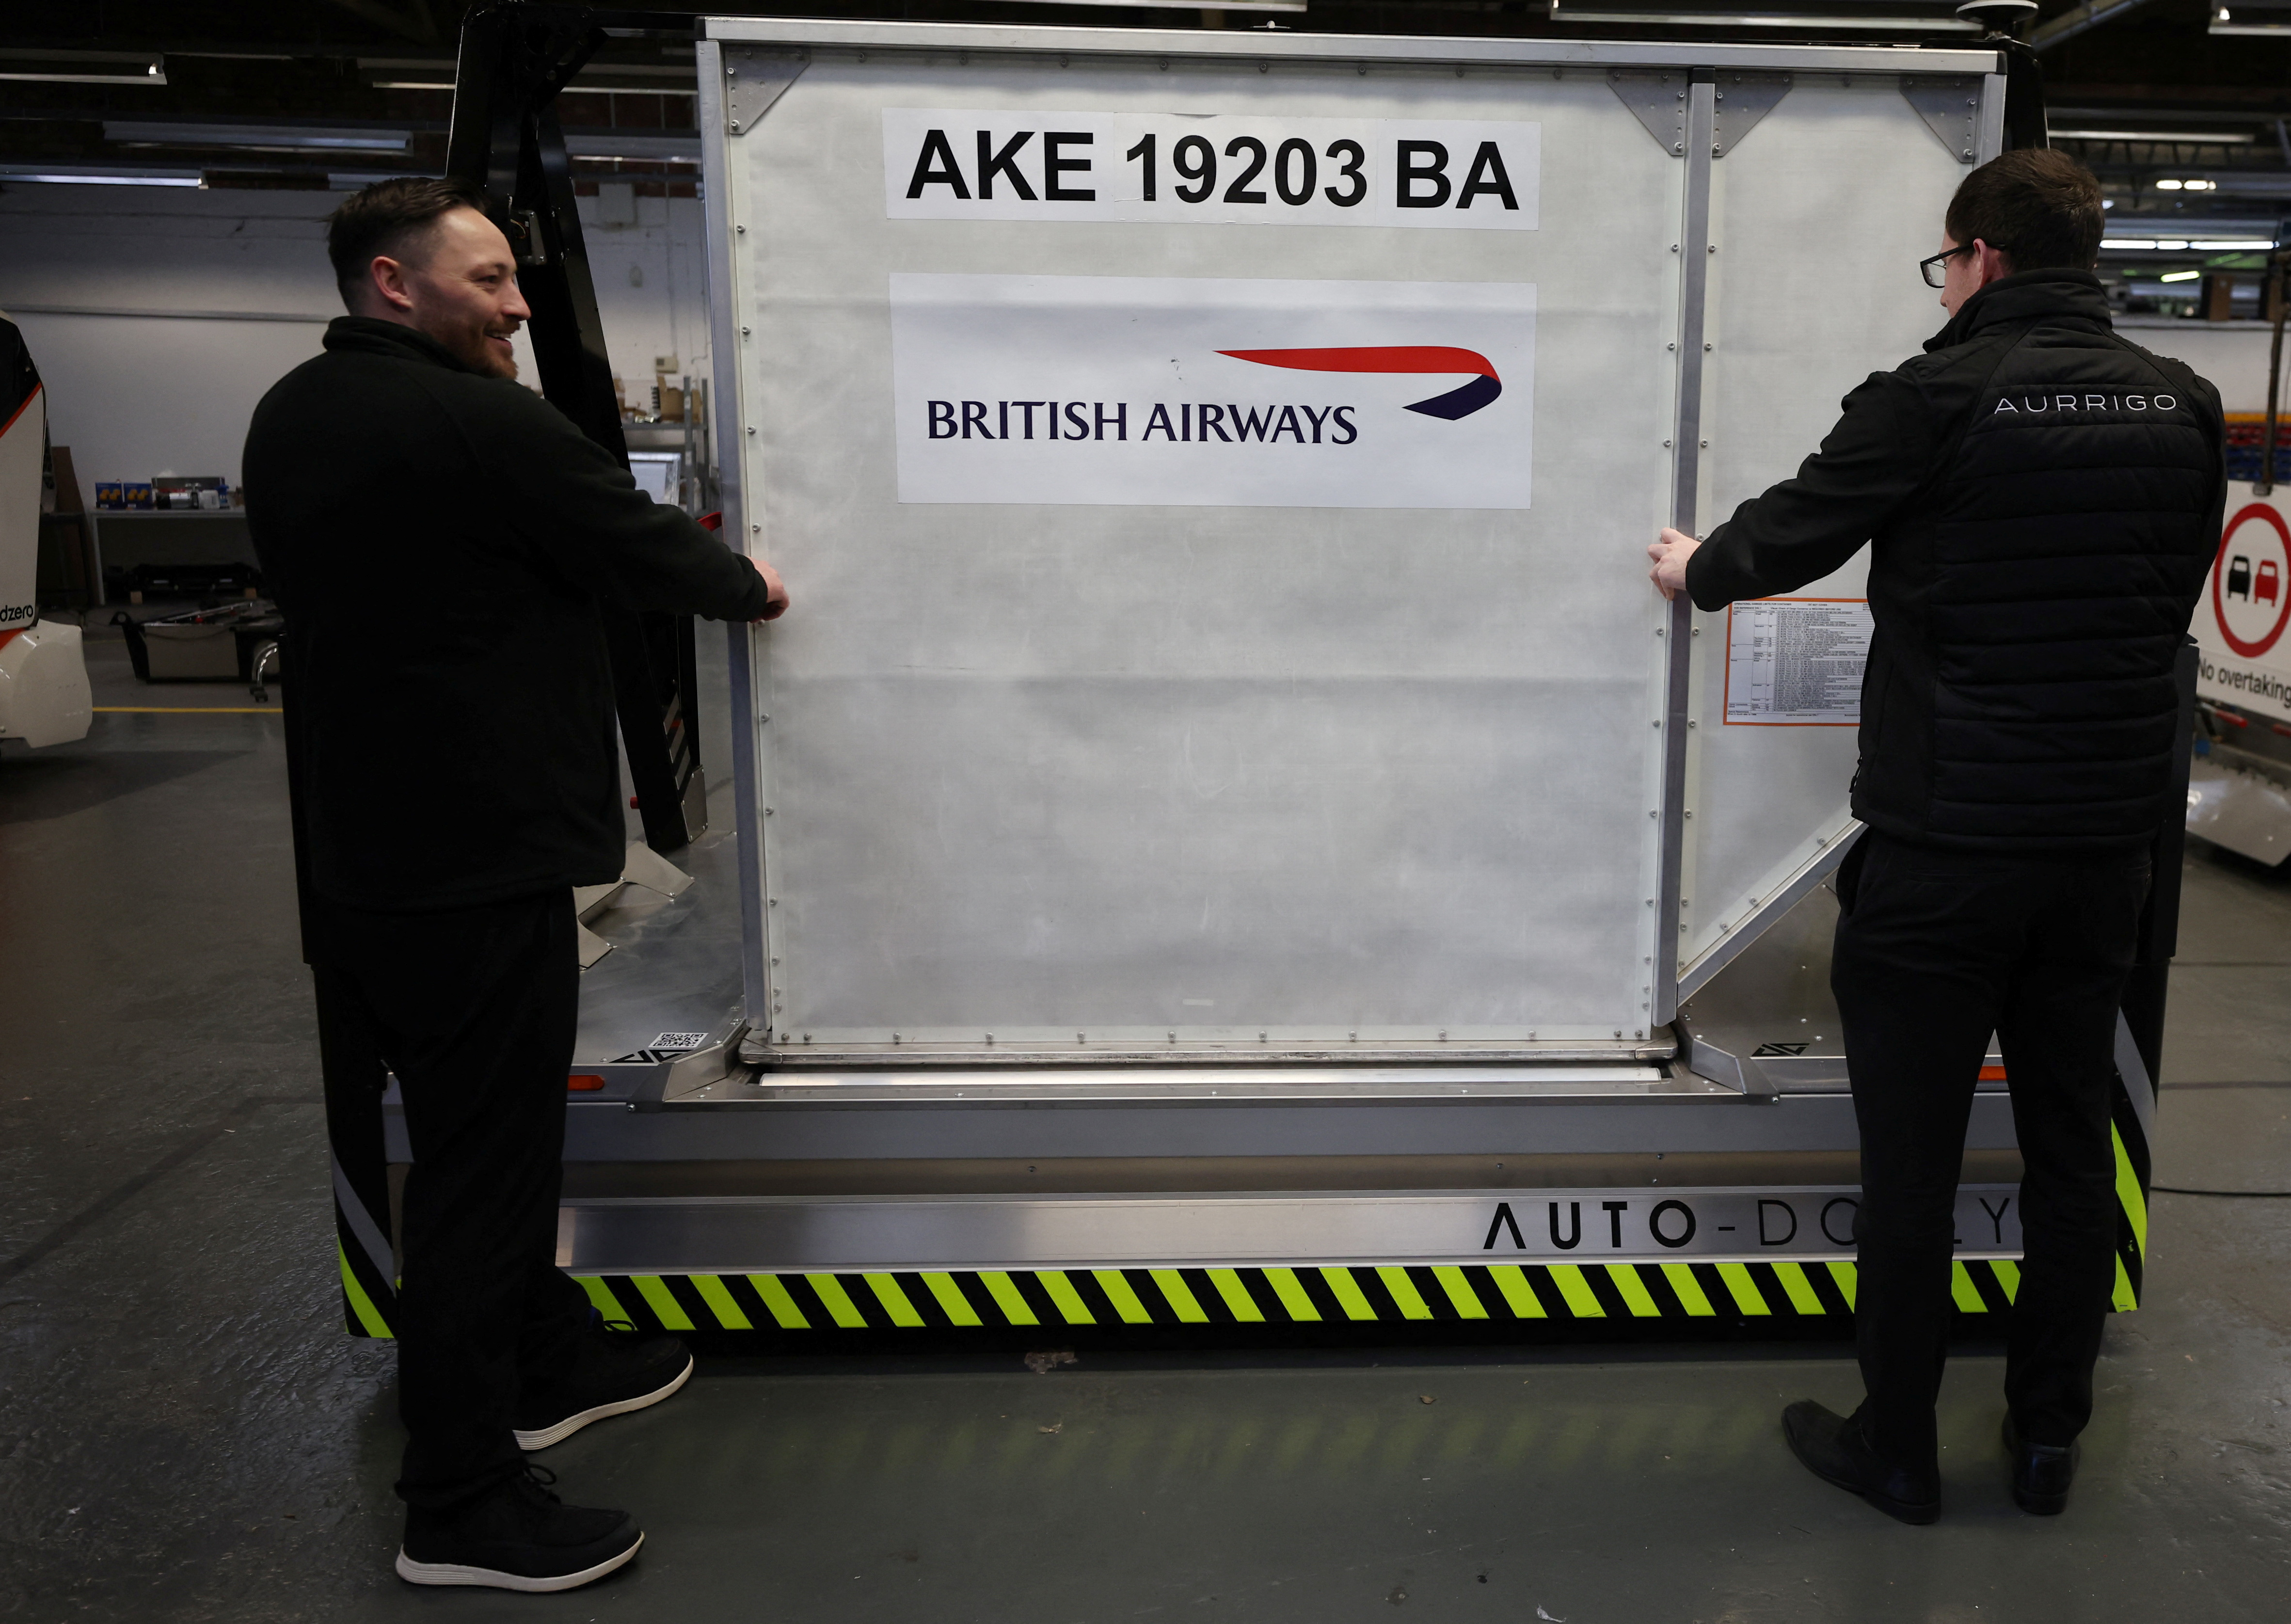 Workers adjust a baggage holder on one of the company’s autonomous ‘Auto-Dolly’ baggage transporter at the Aurrigo factory in Coventry